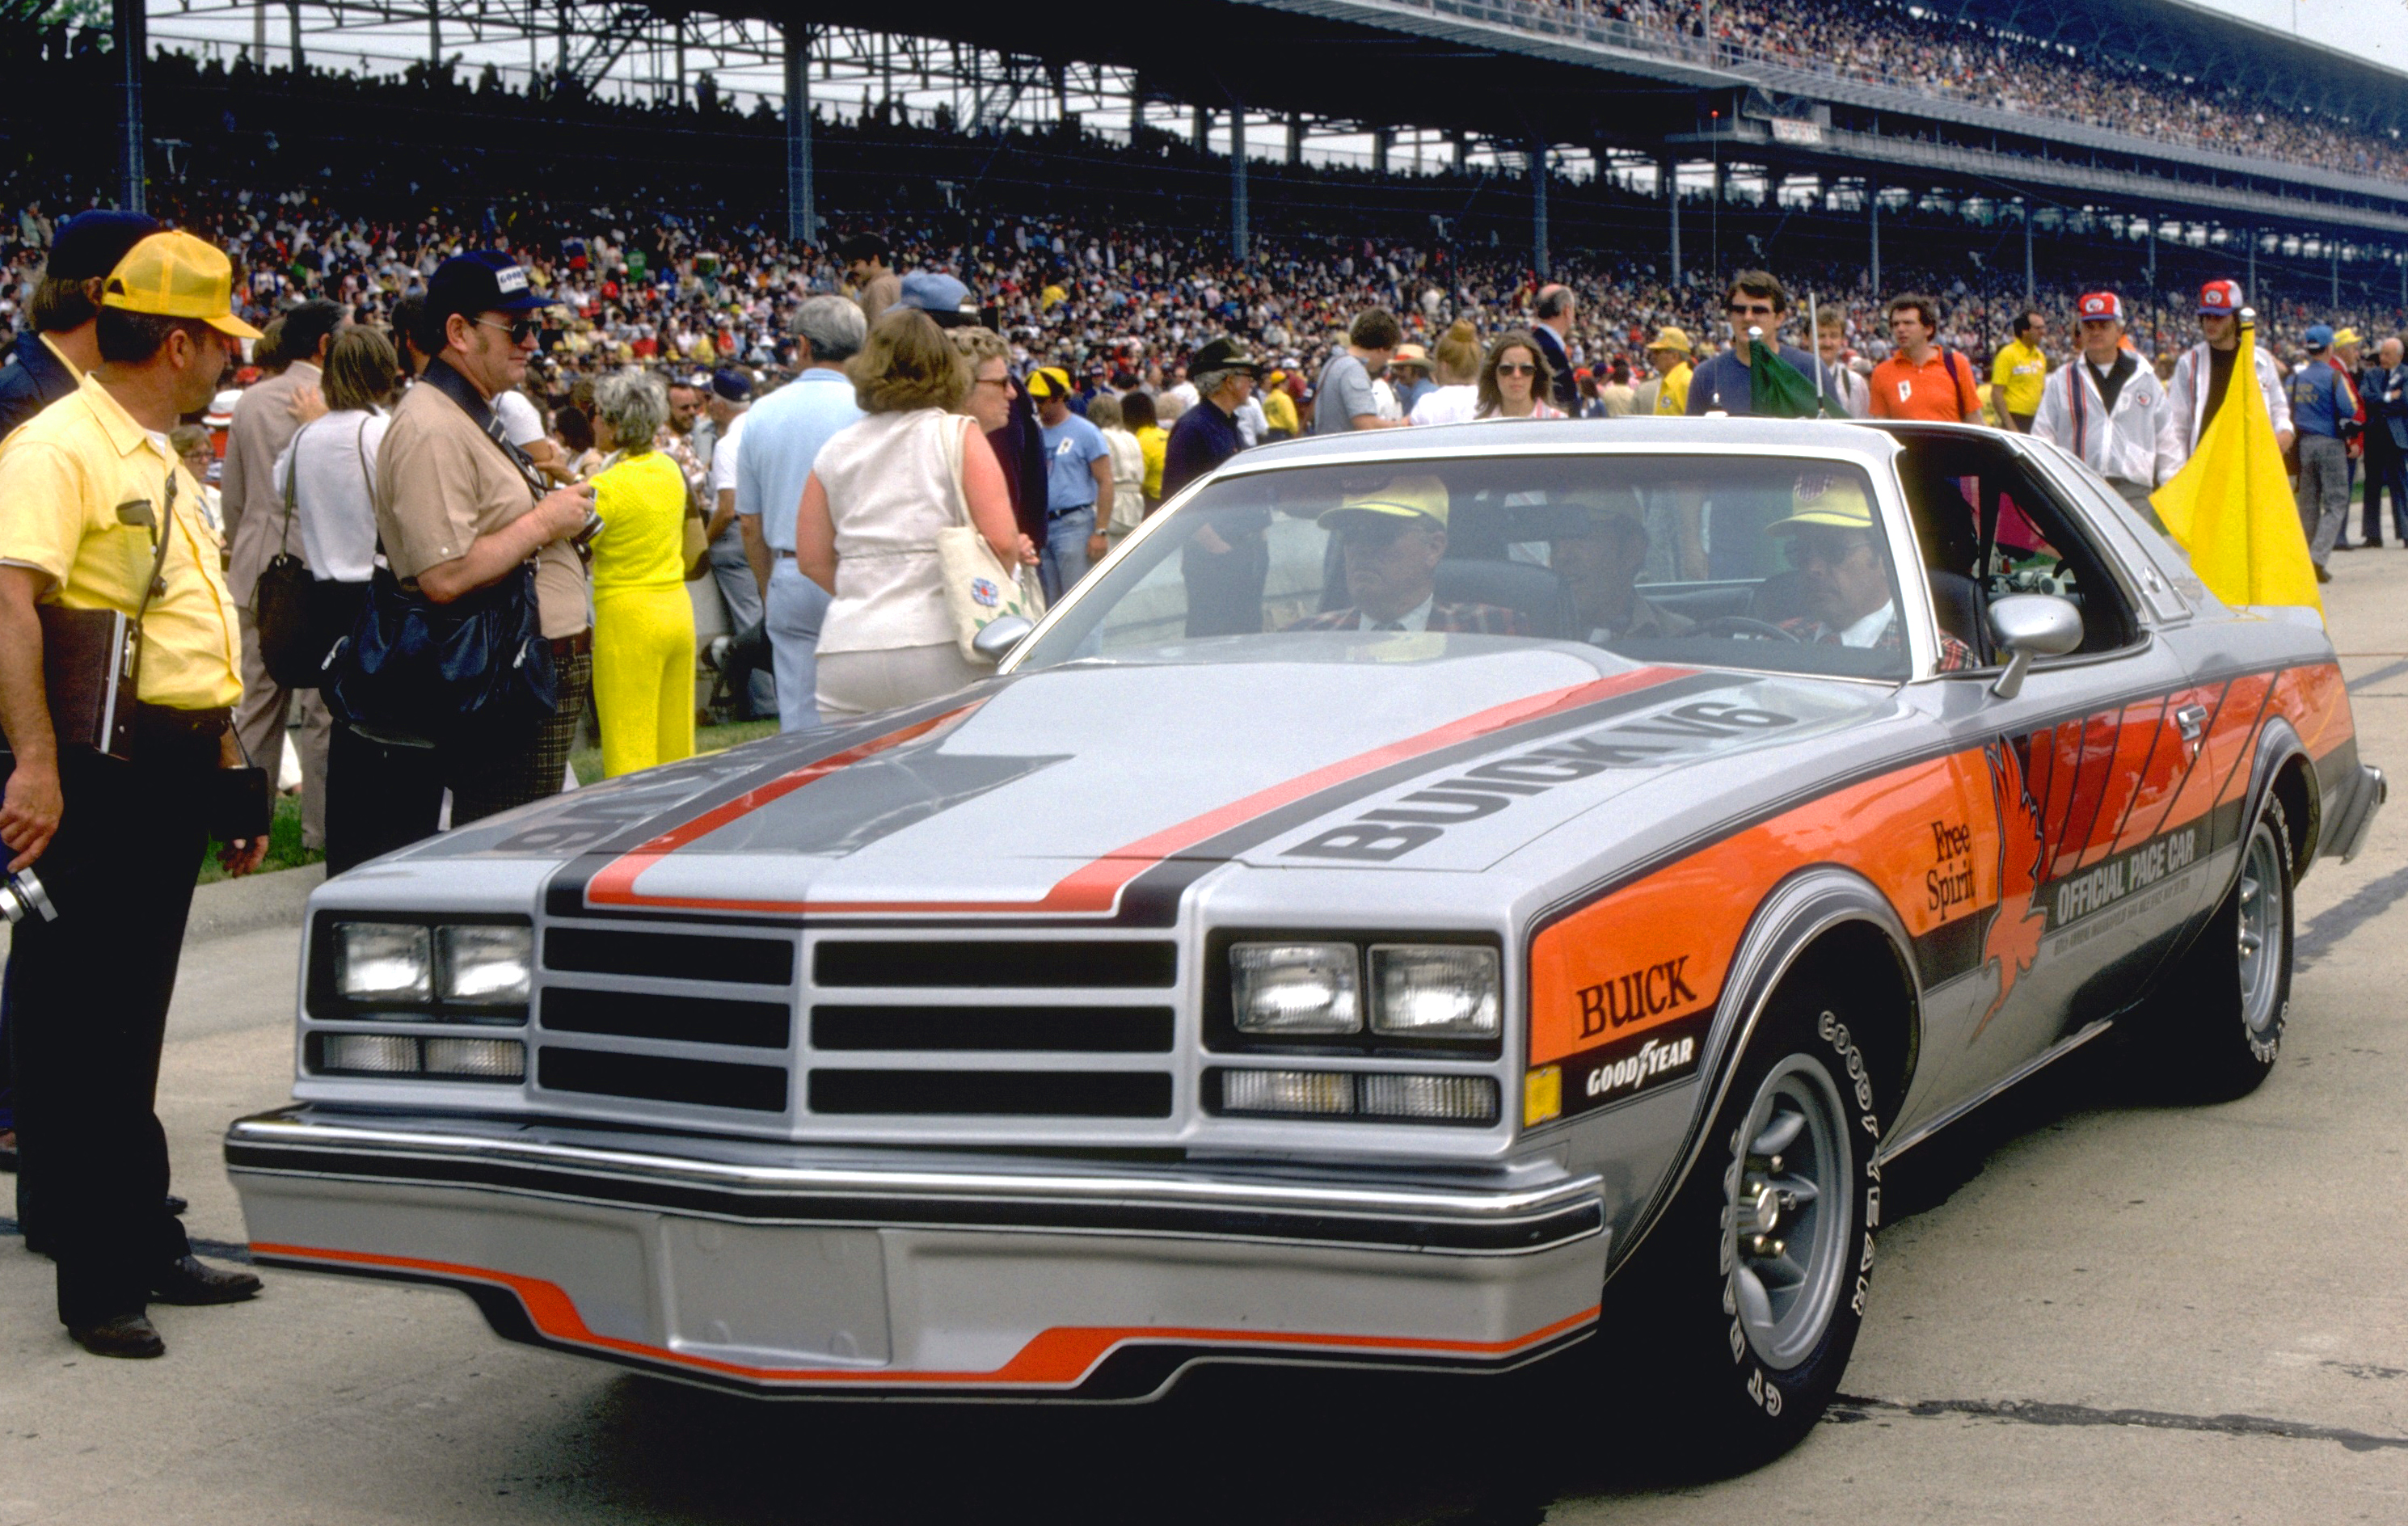 Buick’s turbocharging legacy got its start with the 1976 Century modified to pace the Indianapolis 500 that year.